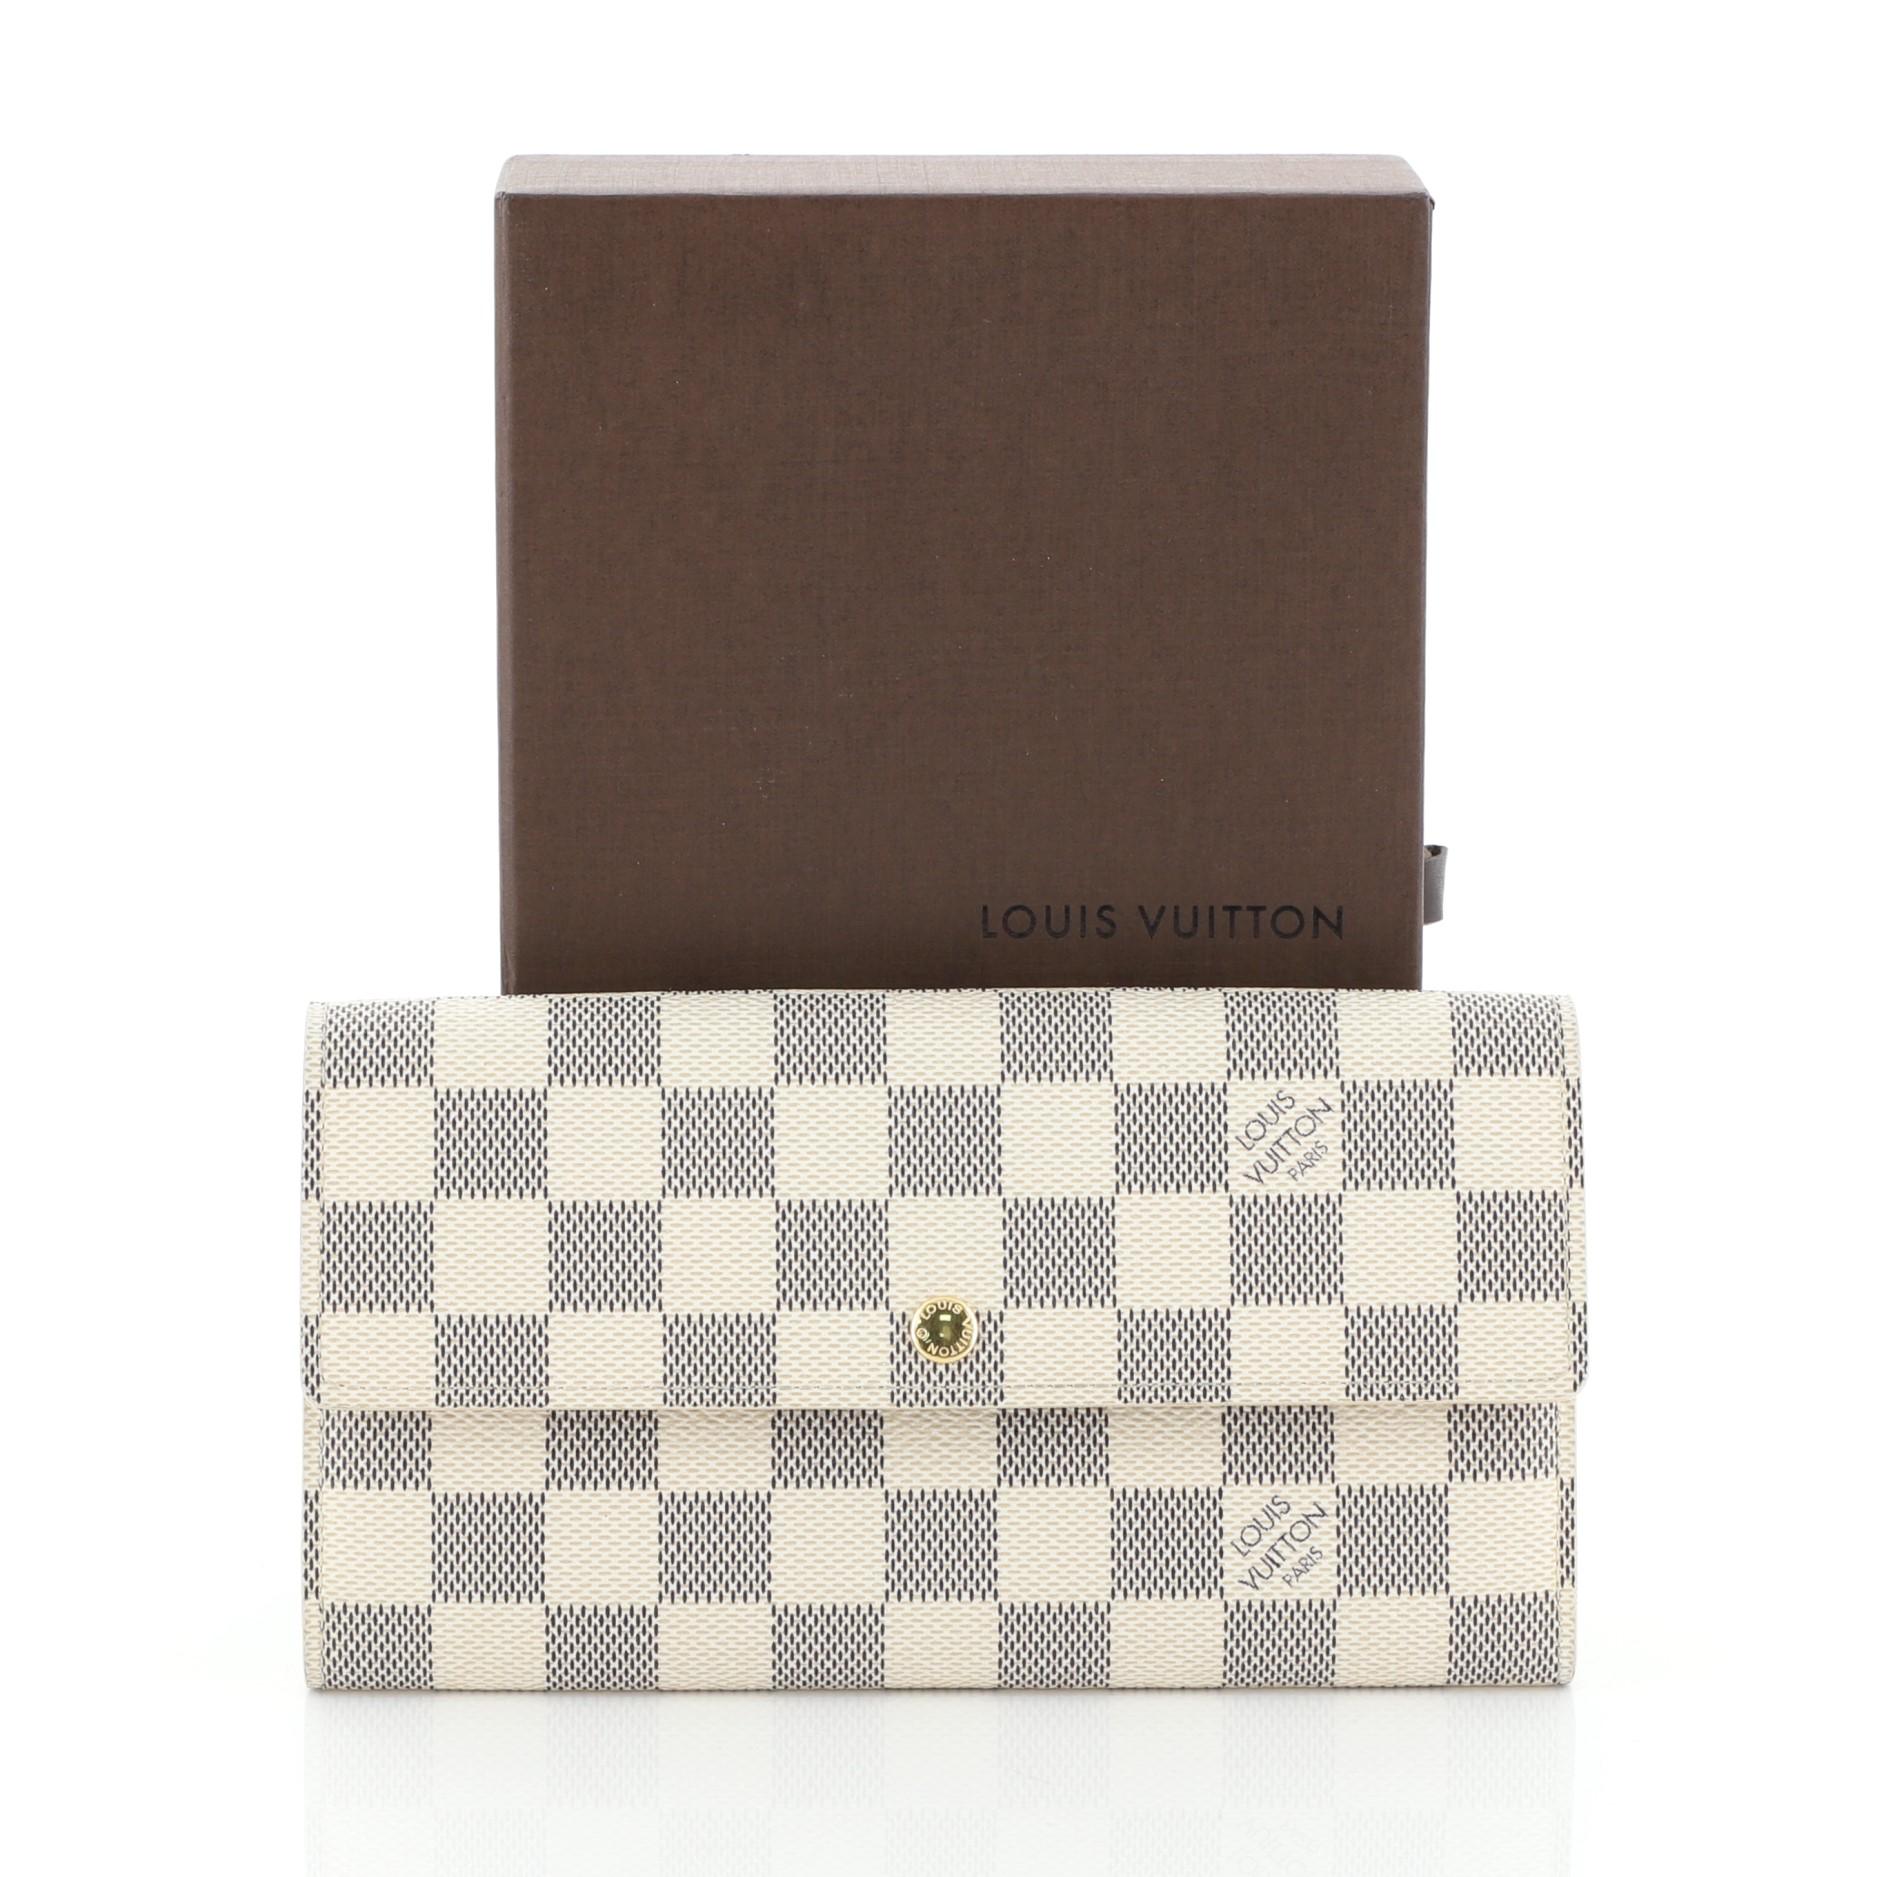 This Louis Vuitton Sarah Wallet Damier, crafted in damier azur coated canvas, features gold-tone hardware. Its snap button closure opens to a white leather interior with middle zip compartment. Authenticity code reads: MI2047. 

Condition: